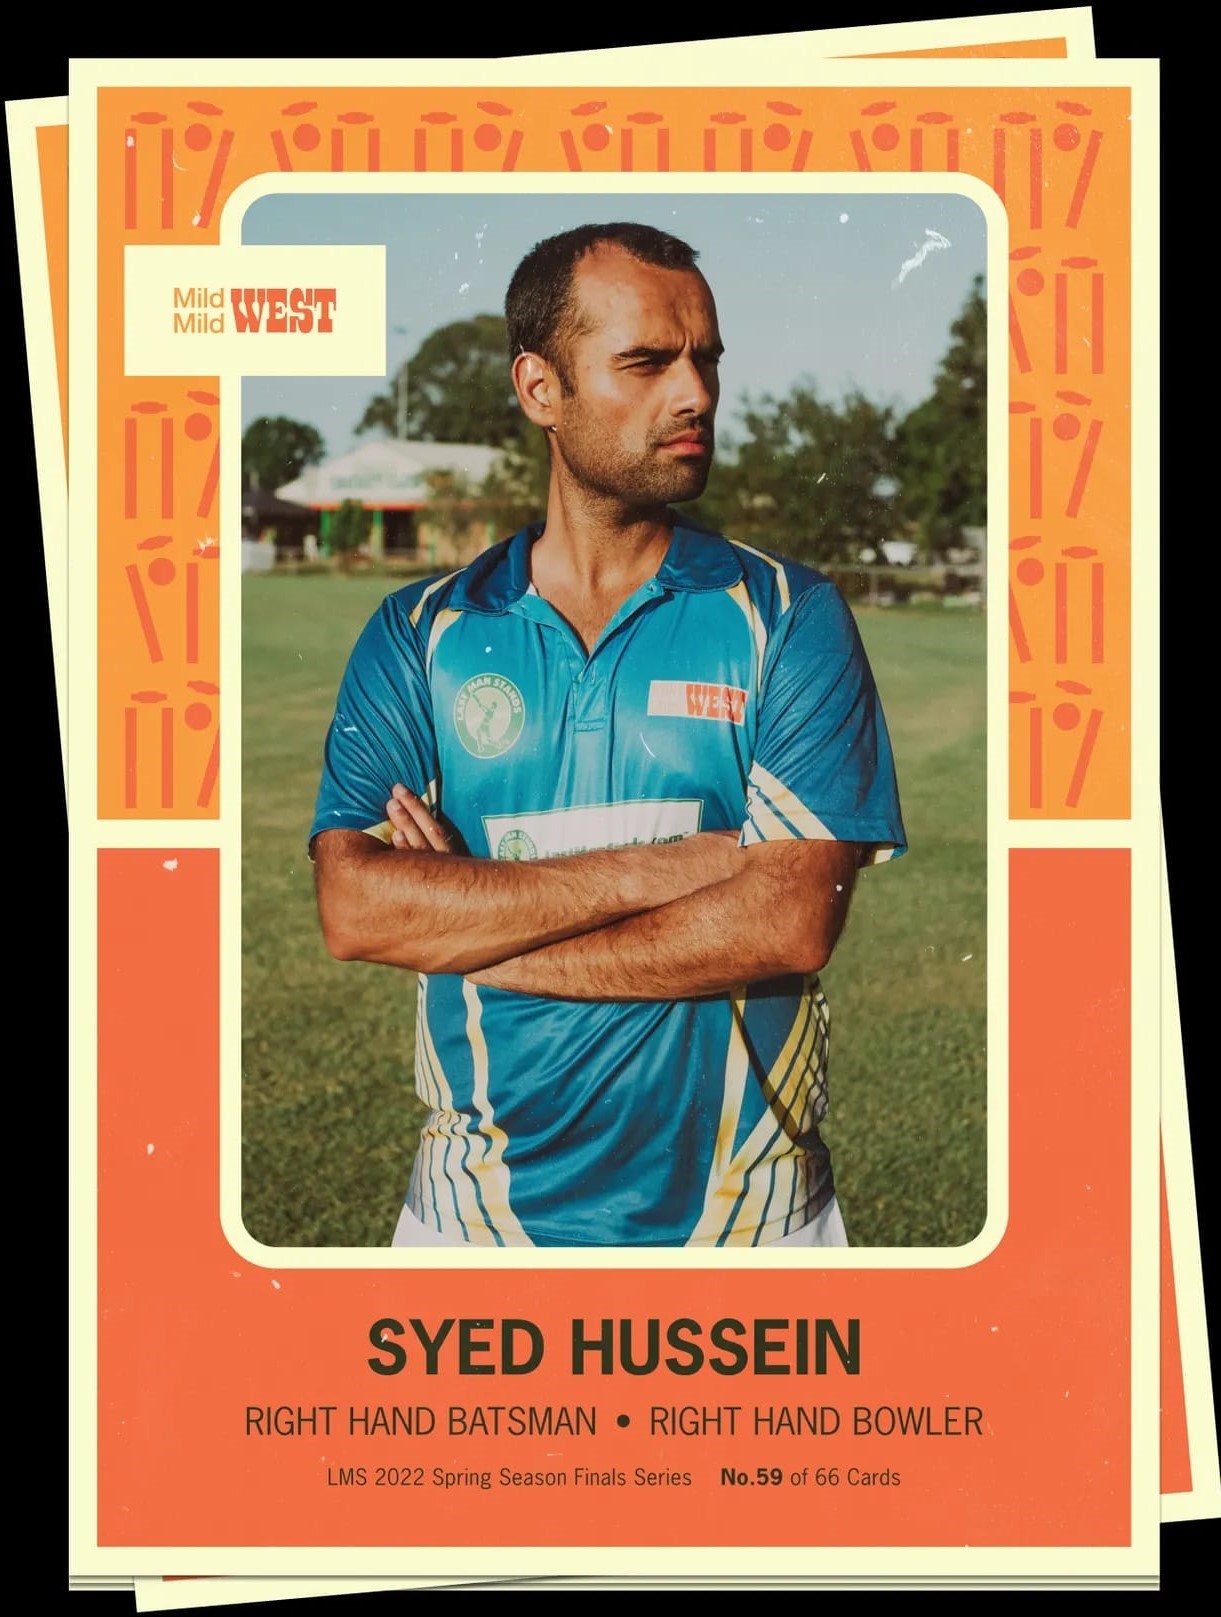 Syed Hussein